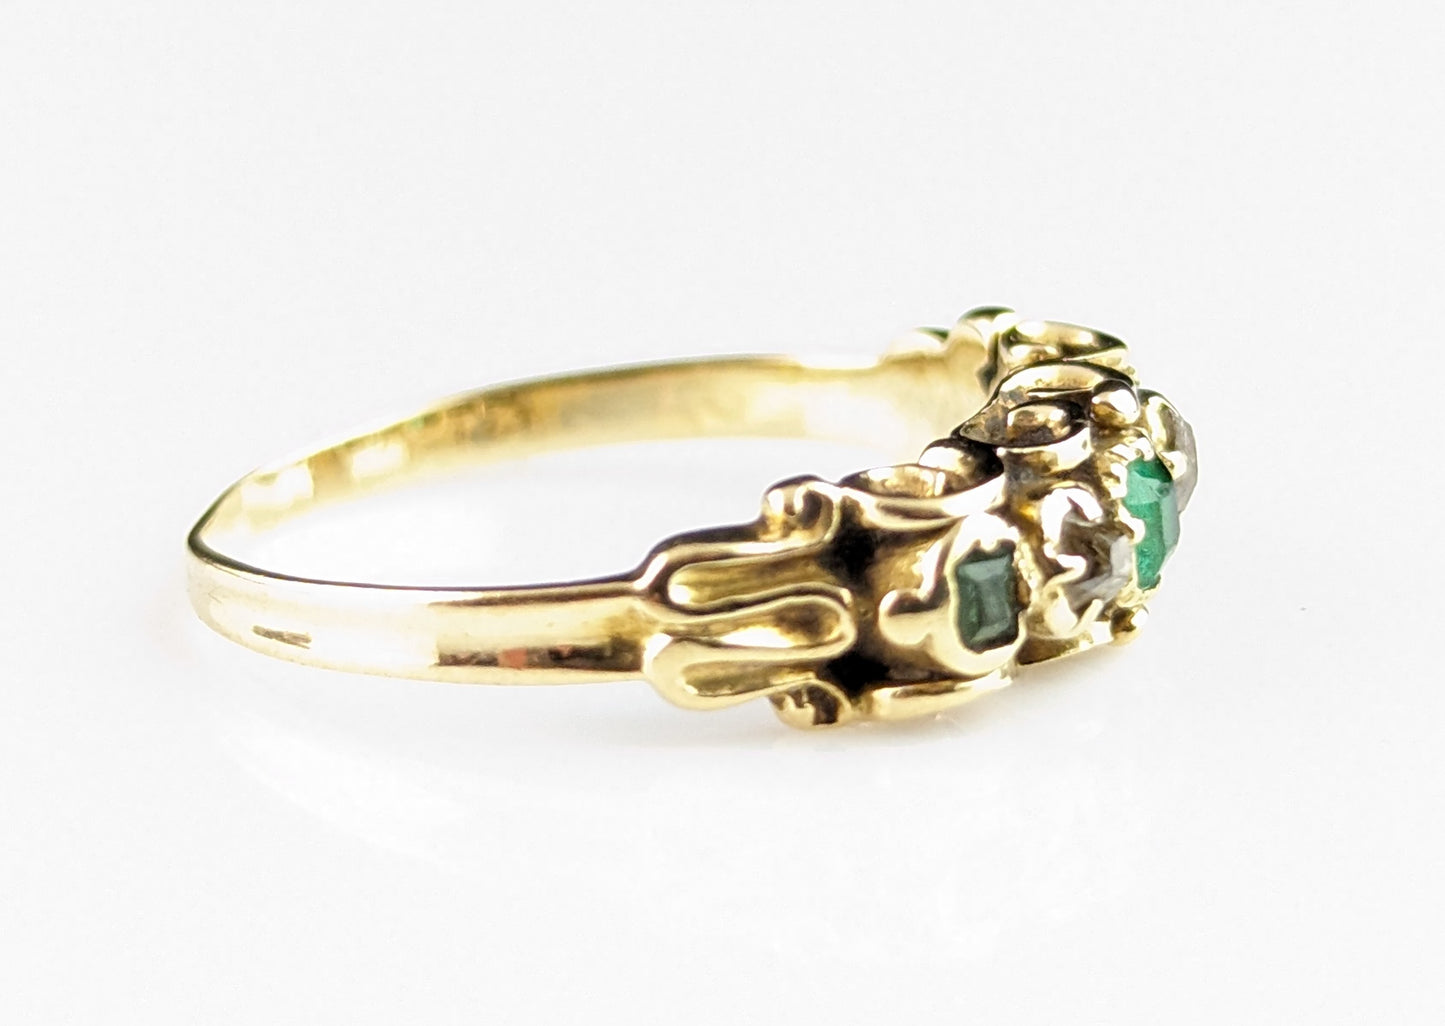 Antique Emerald and old cut diamond ring, 18ct gold, Victorian five stone